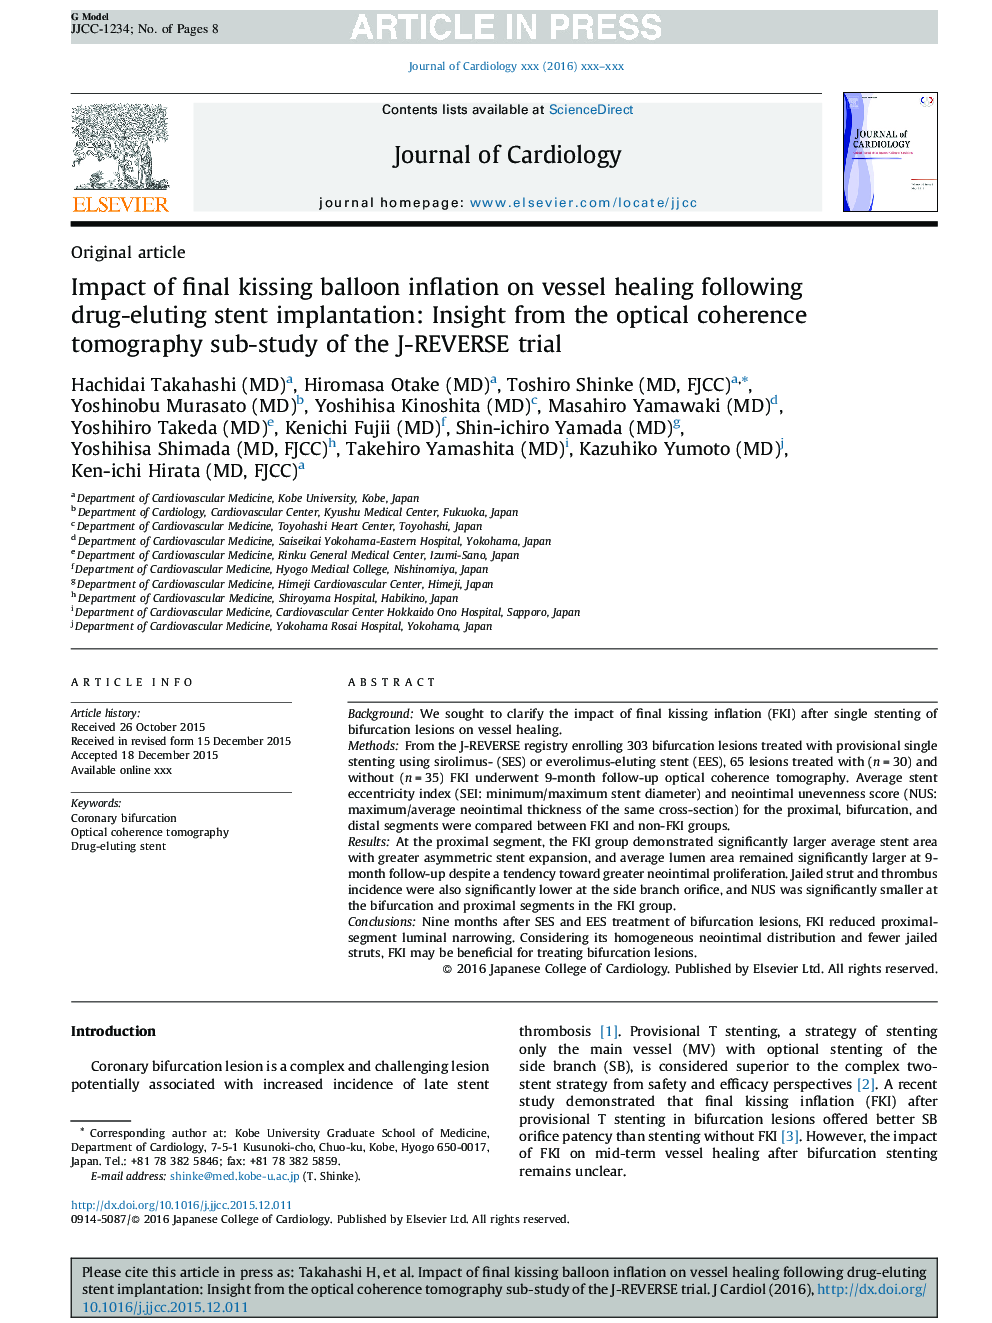 Impact of final kissing balloon inflation on vessel healing following drug-eluting stent implantation: Insight from the optical coherence tomography sub-study of the J-REVERSE trial